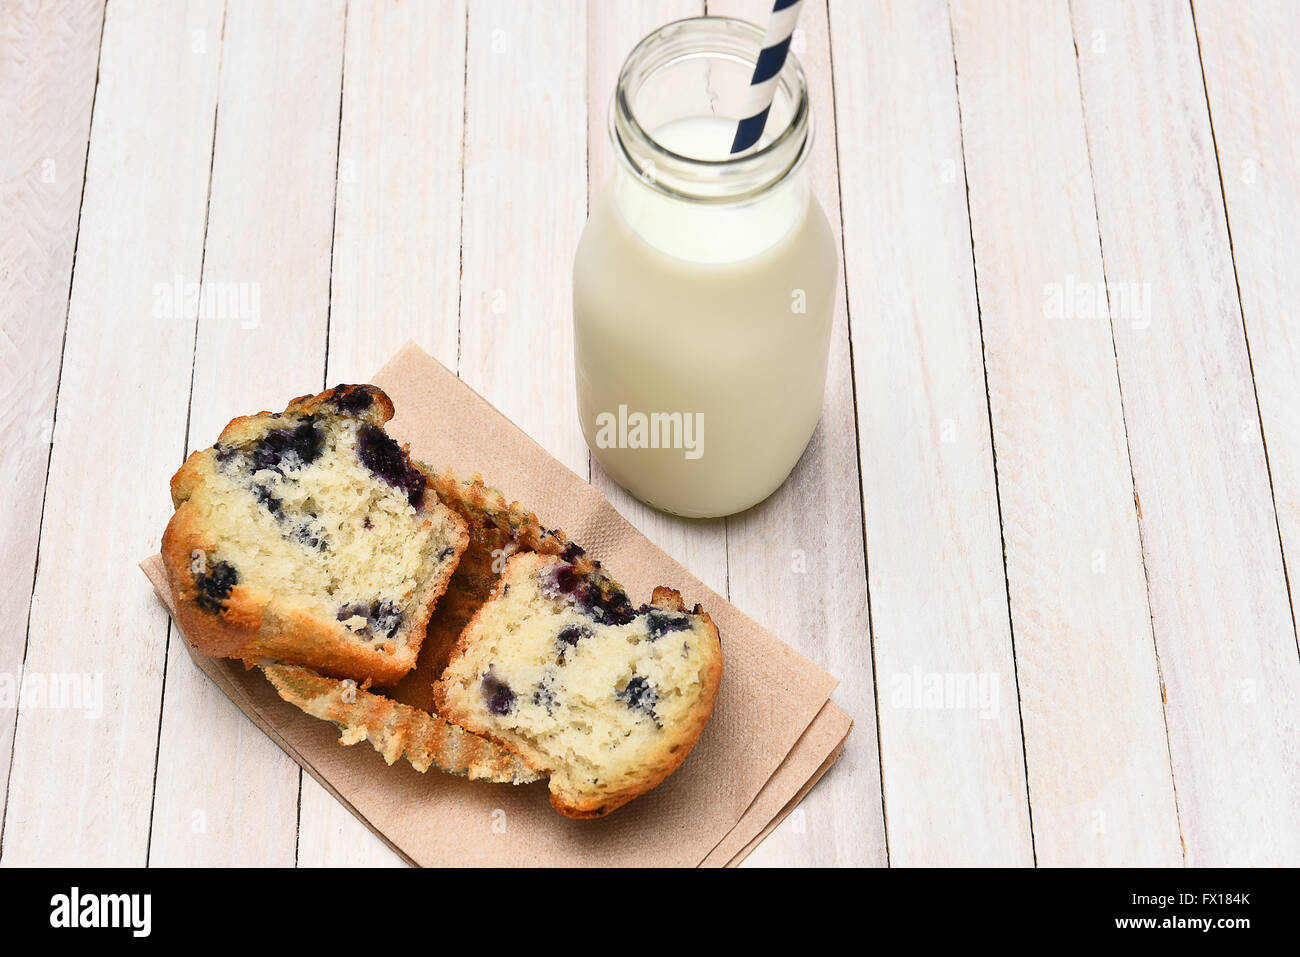 High angle view of a blueberry muffin and bottle of milk on a rustic white table. The muffin is broken in half on a napkin. Stock Photo